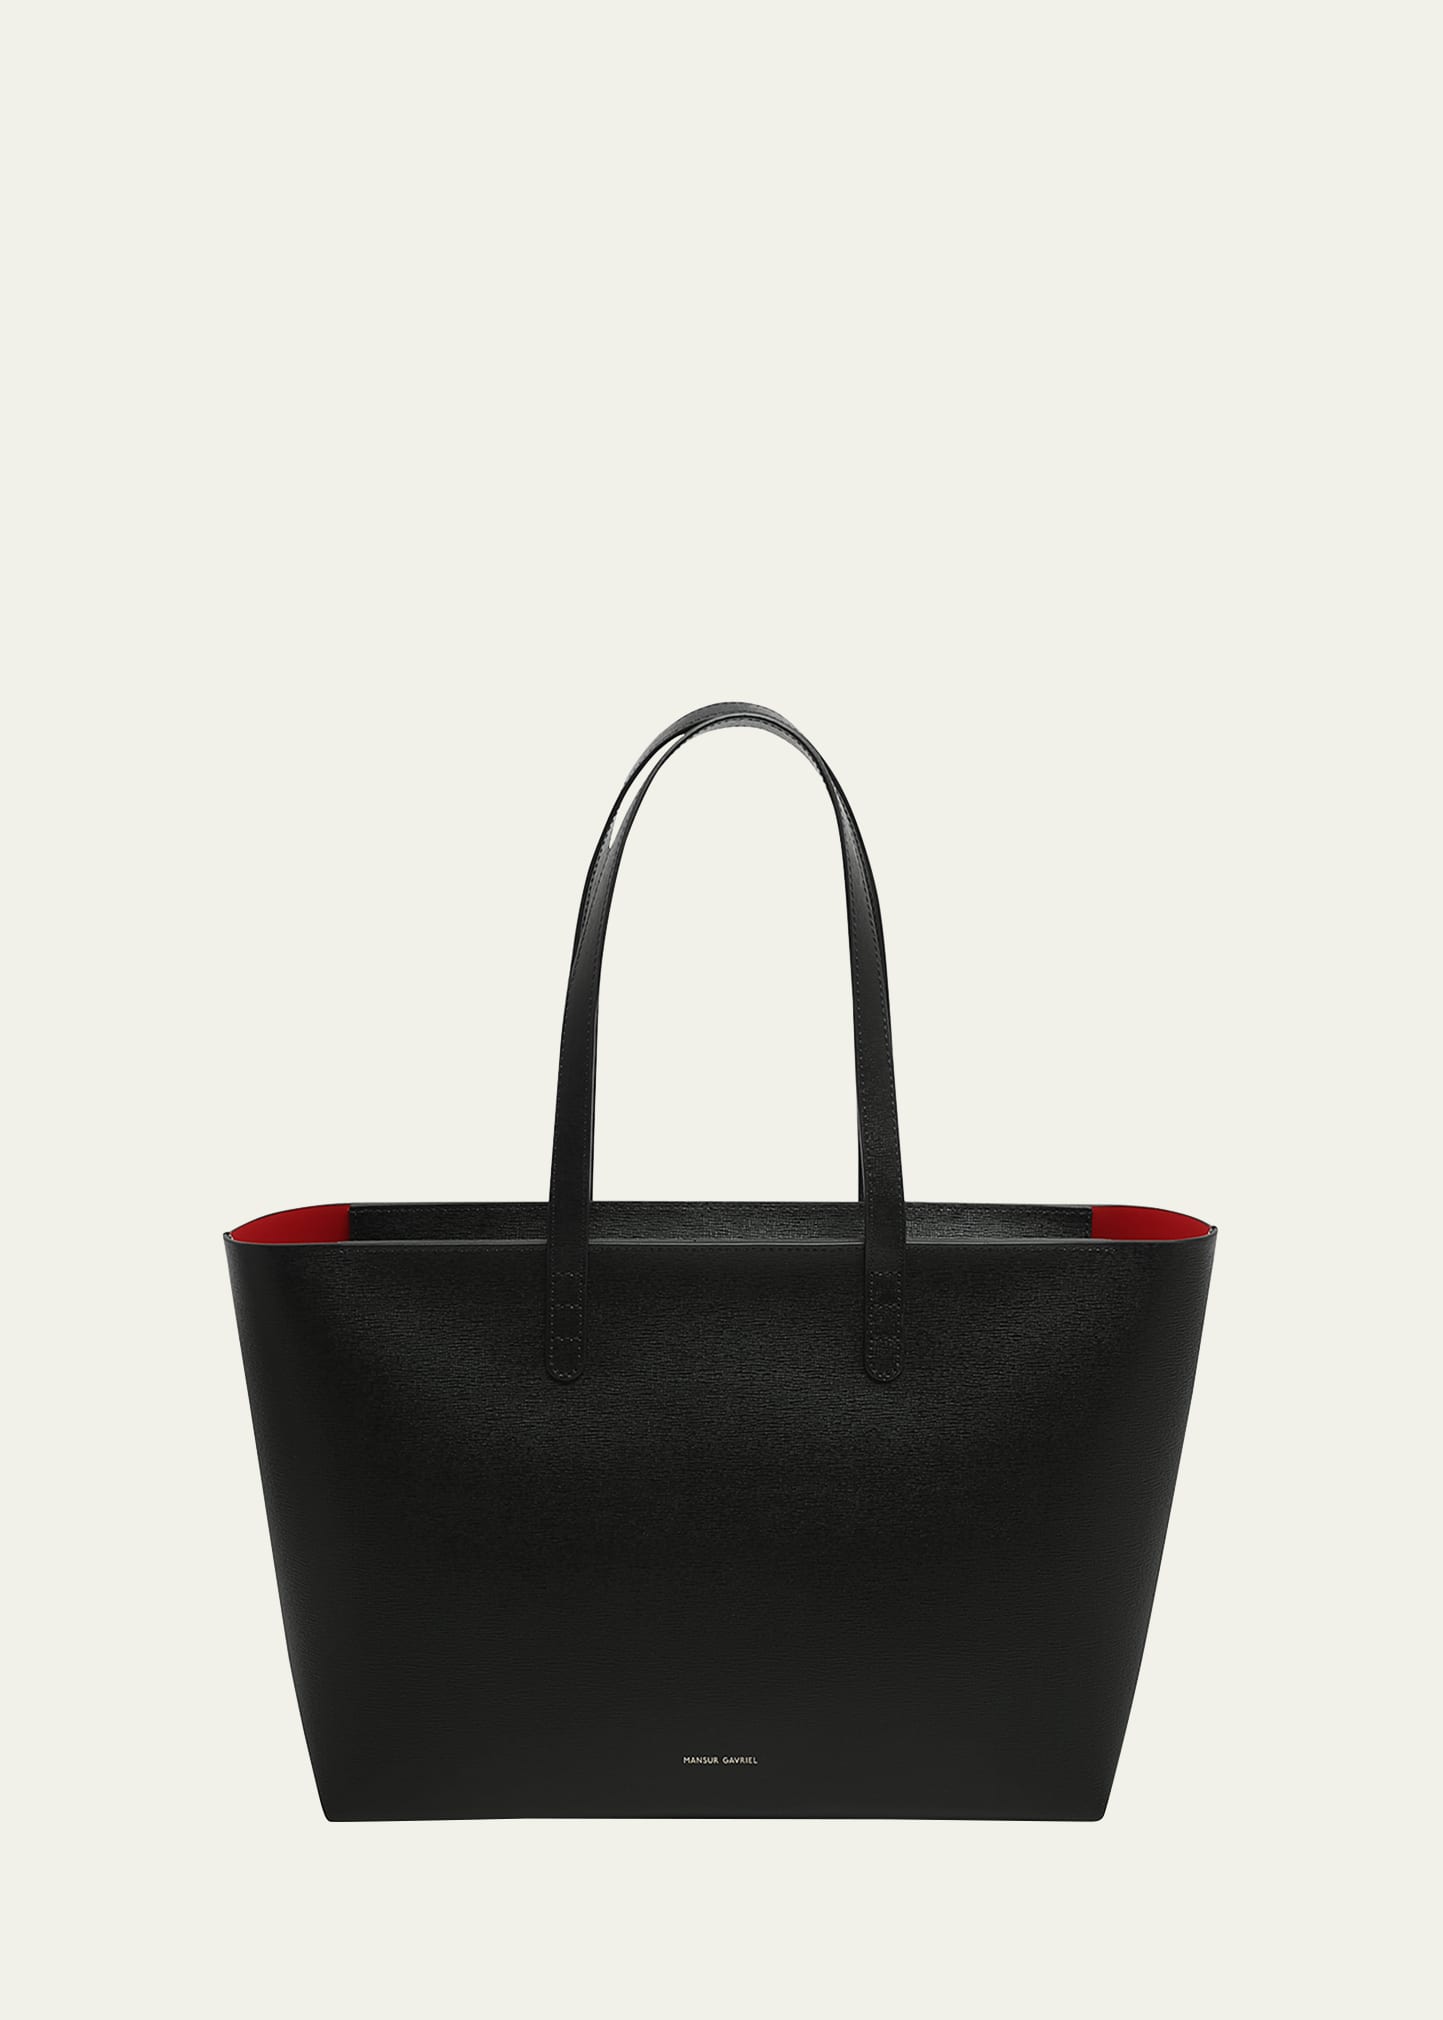 Small East-West Zip Leather Tote Bag